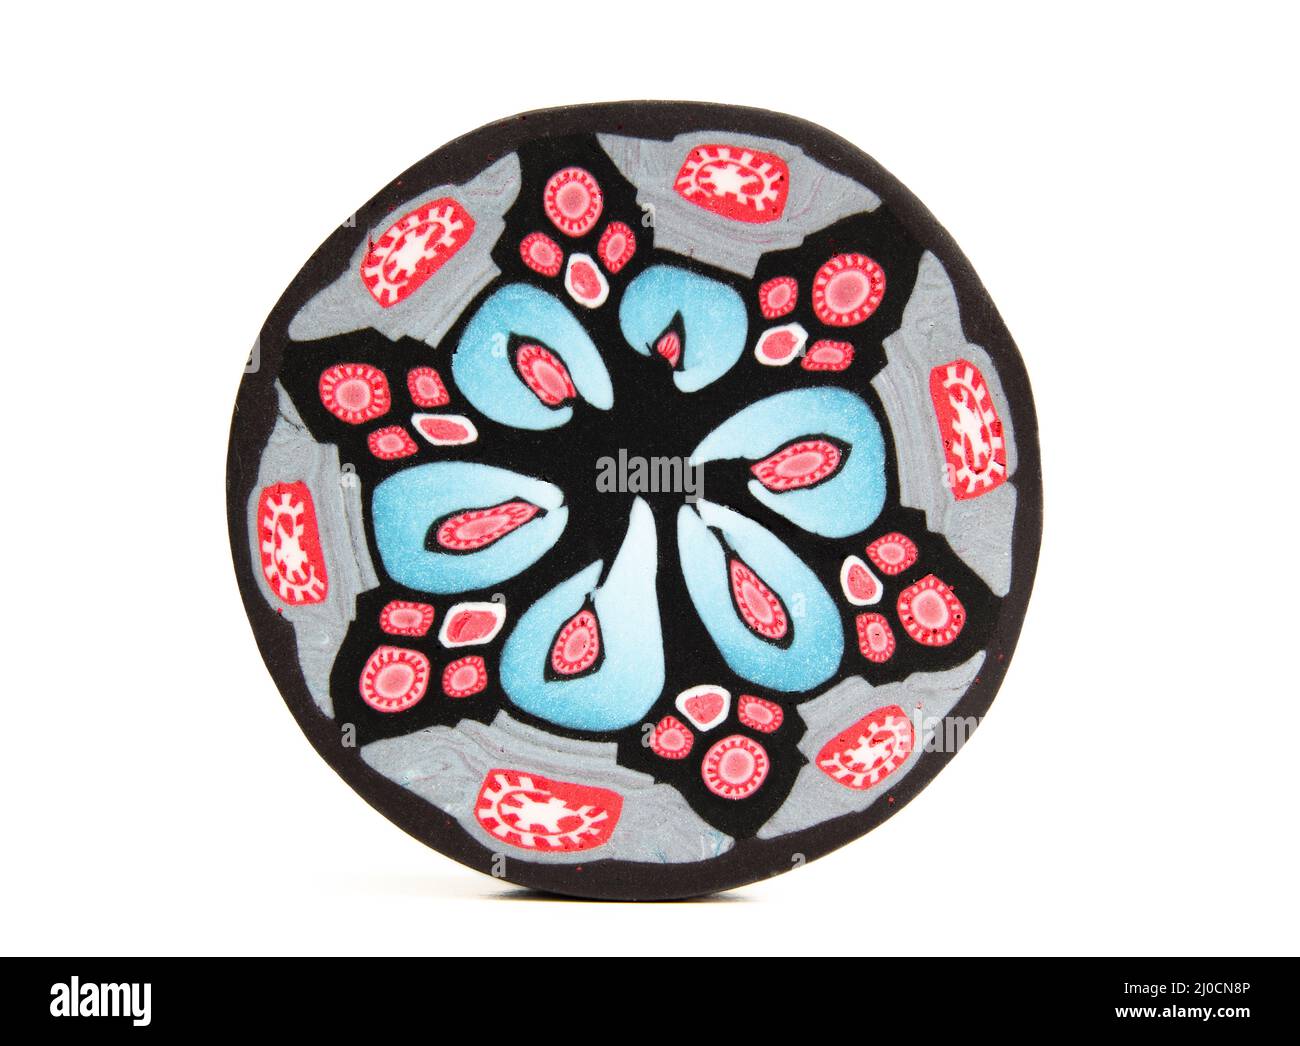 Millefiori cane slice or cross section. Colorful and intricate polymer clay cane. Blue, red and black floral designs, compressed and reduced. Artisan Stock Photo